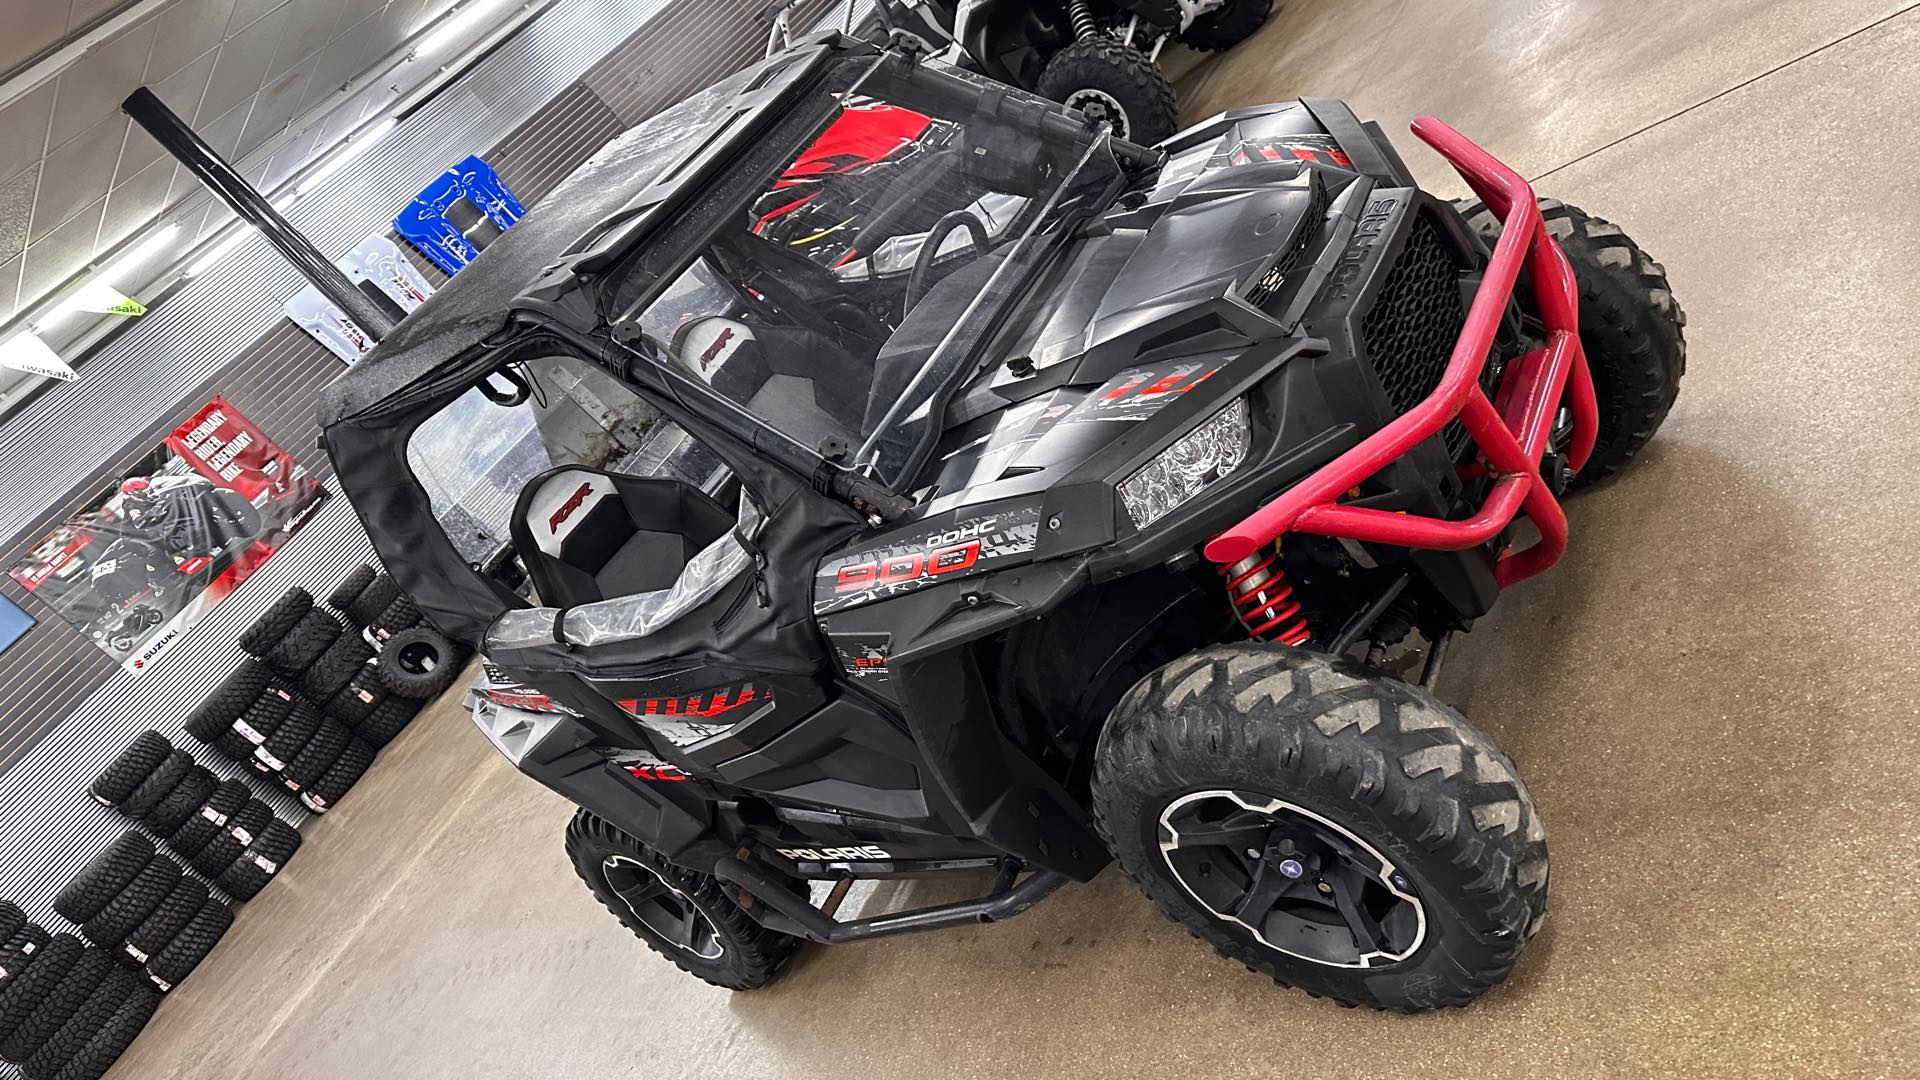 2015 Polaris RZR 900 XC Edition Base at ATVs and More